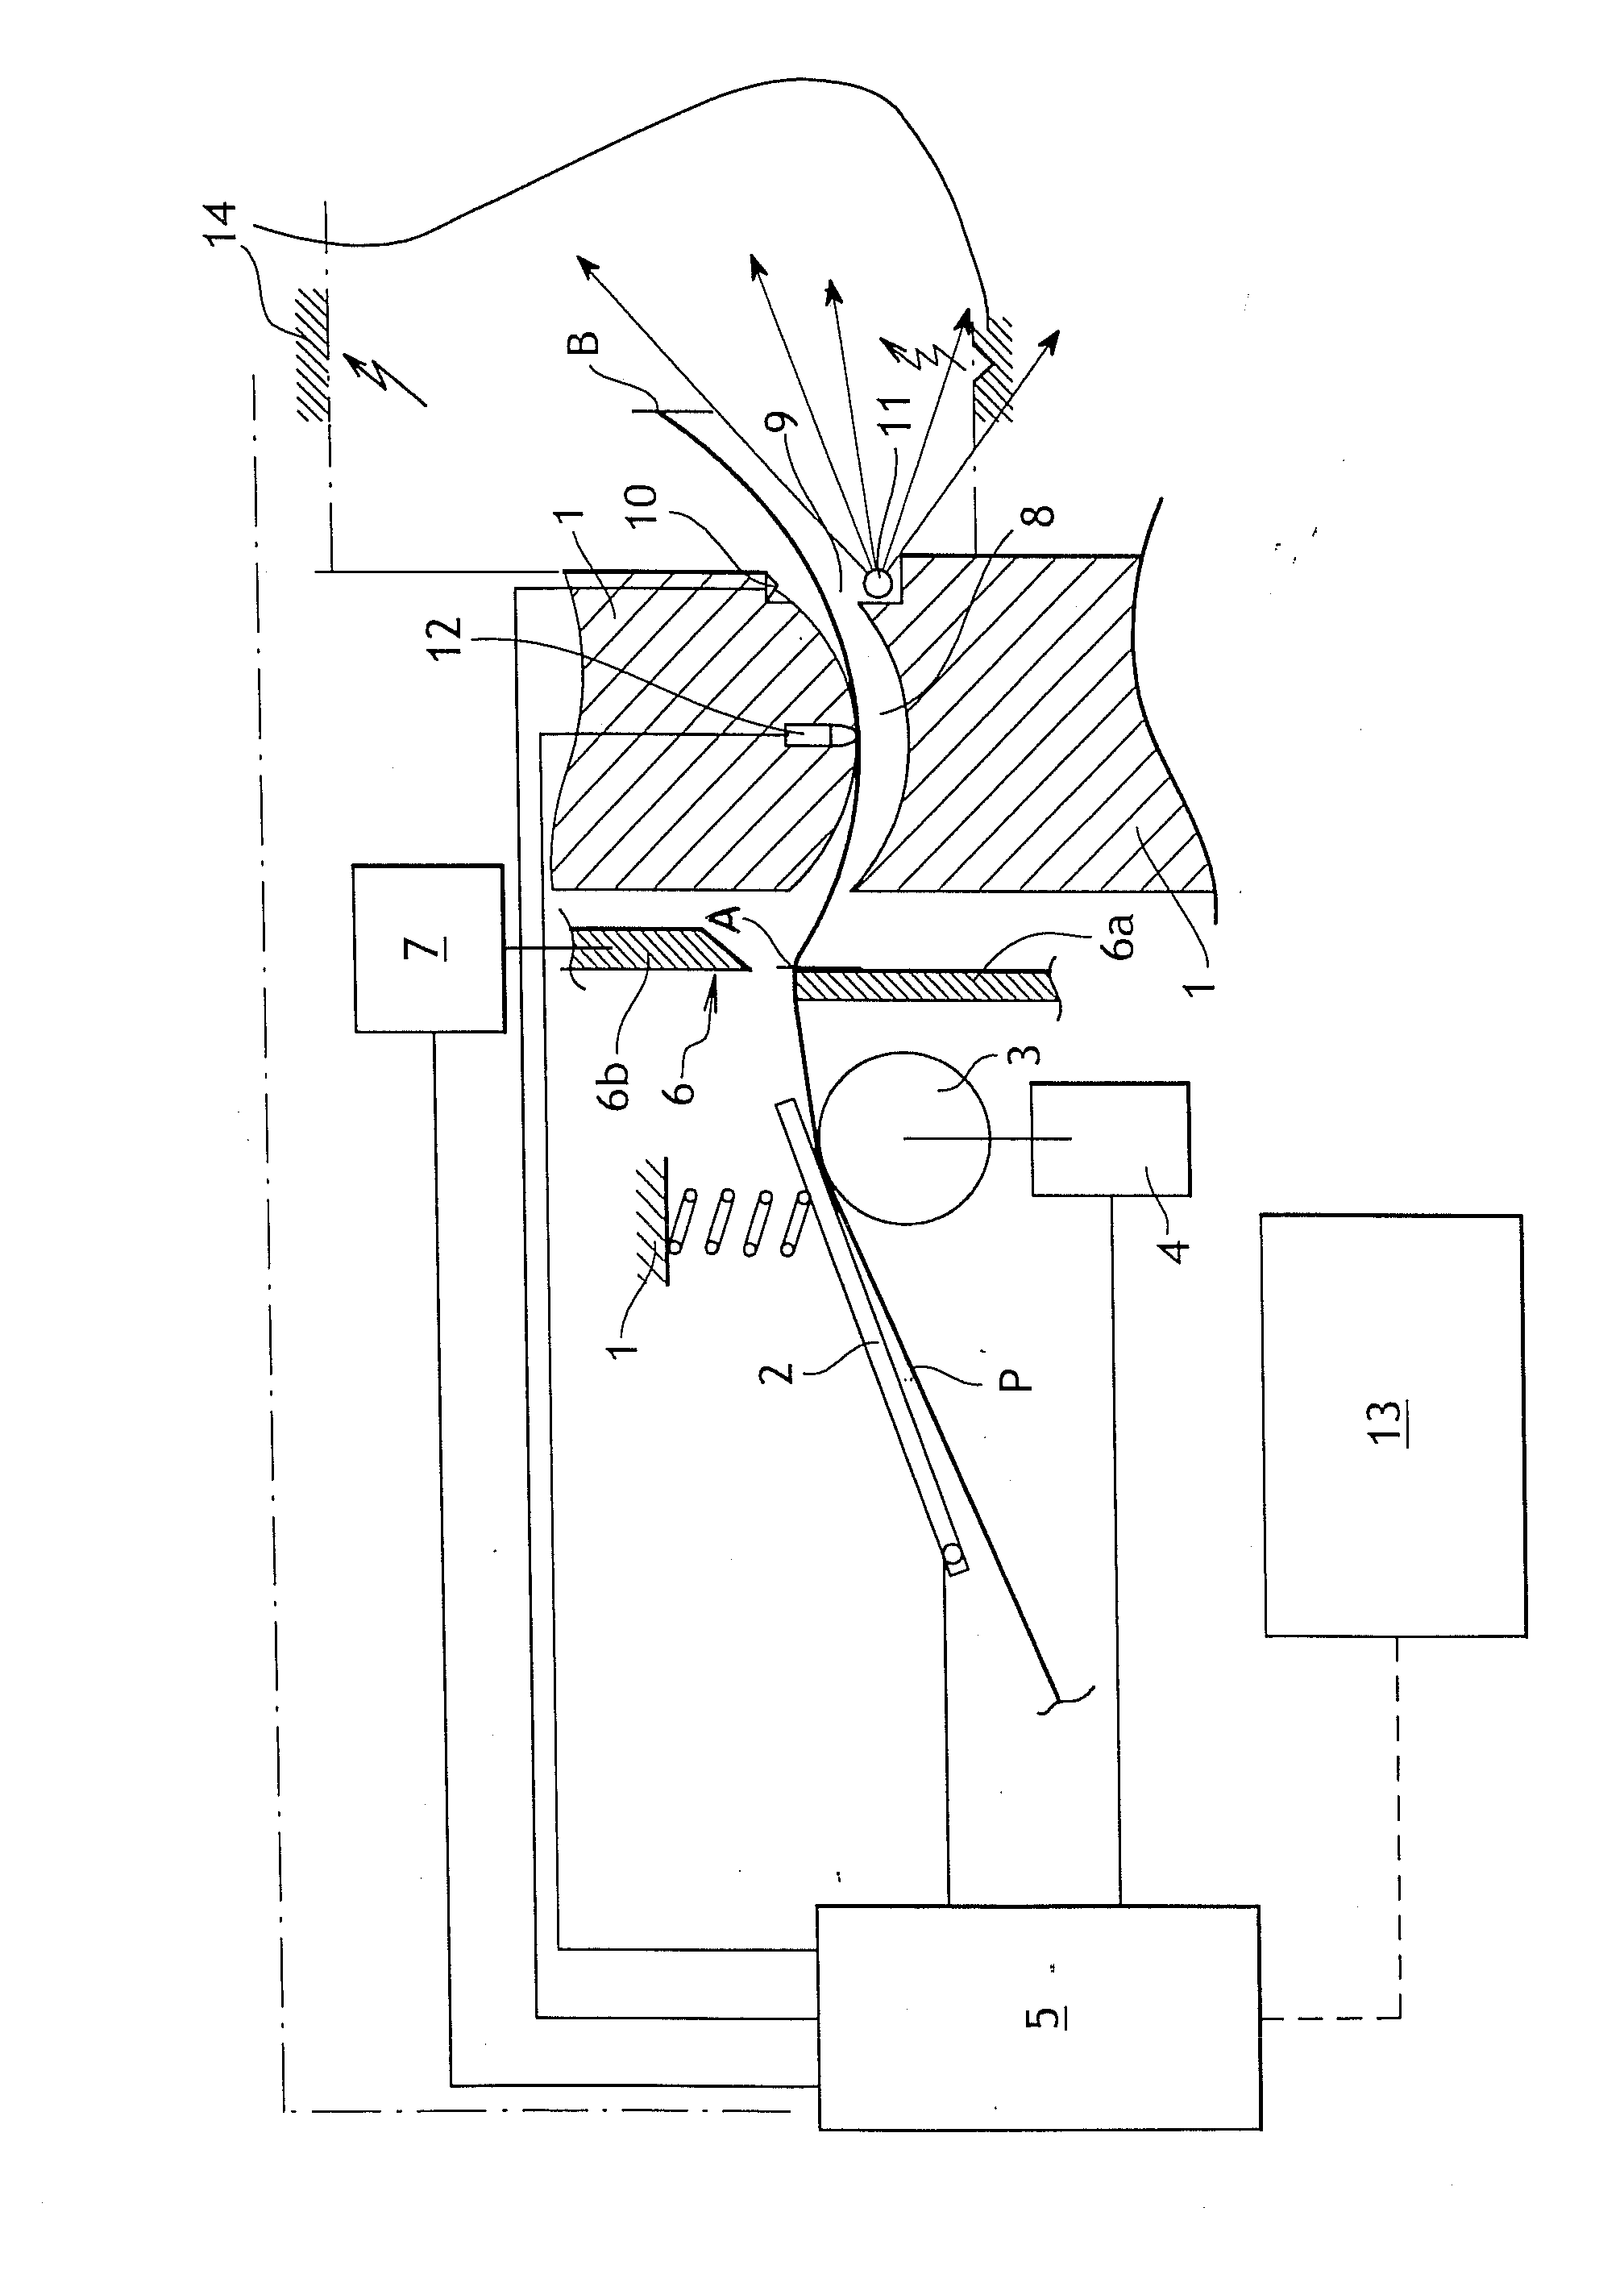 Method of issuing a printed ticket